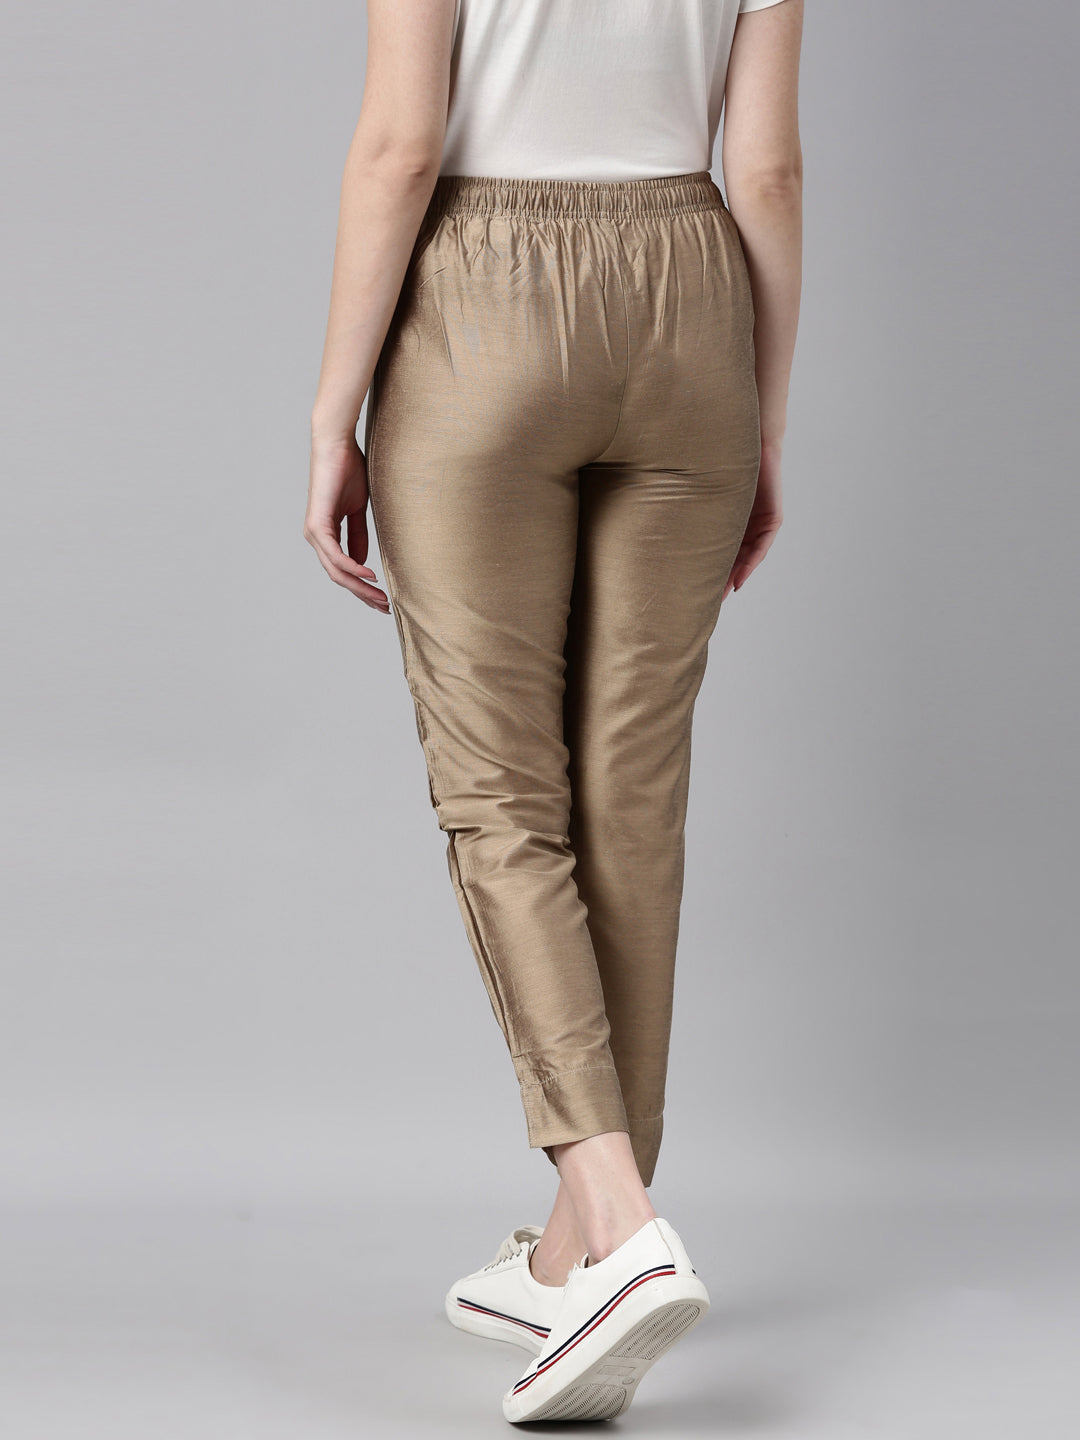 Go Colors Trouser - Buy Go Colors Trousers for Women | Myntra